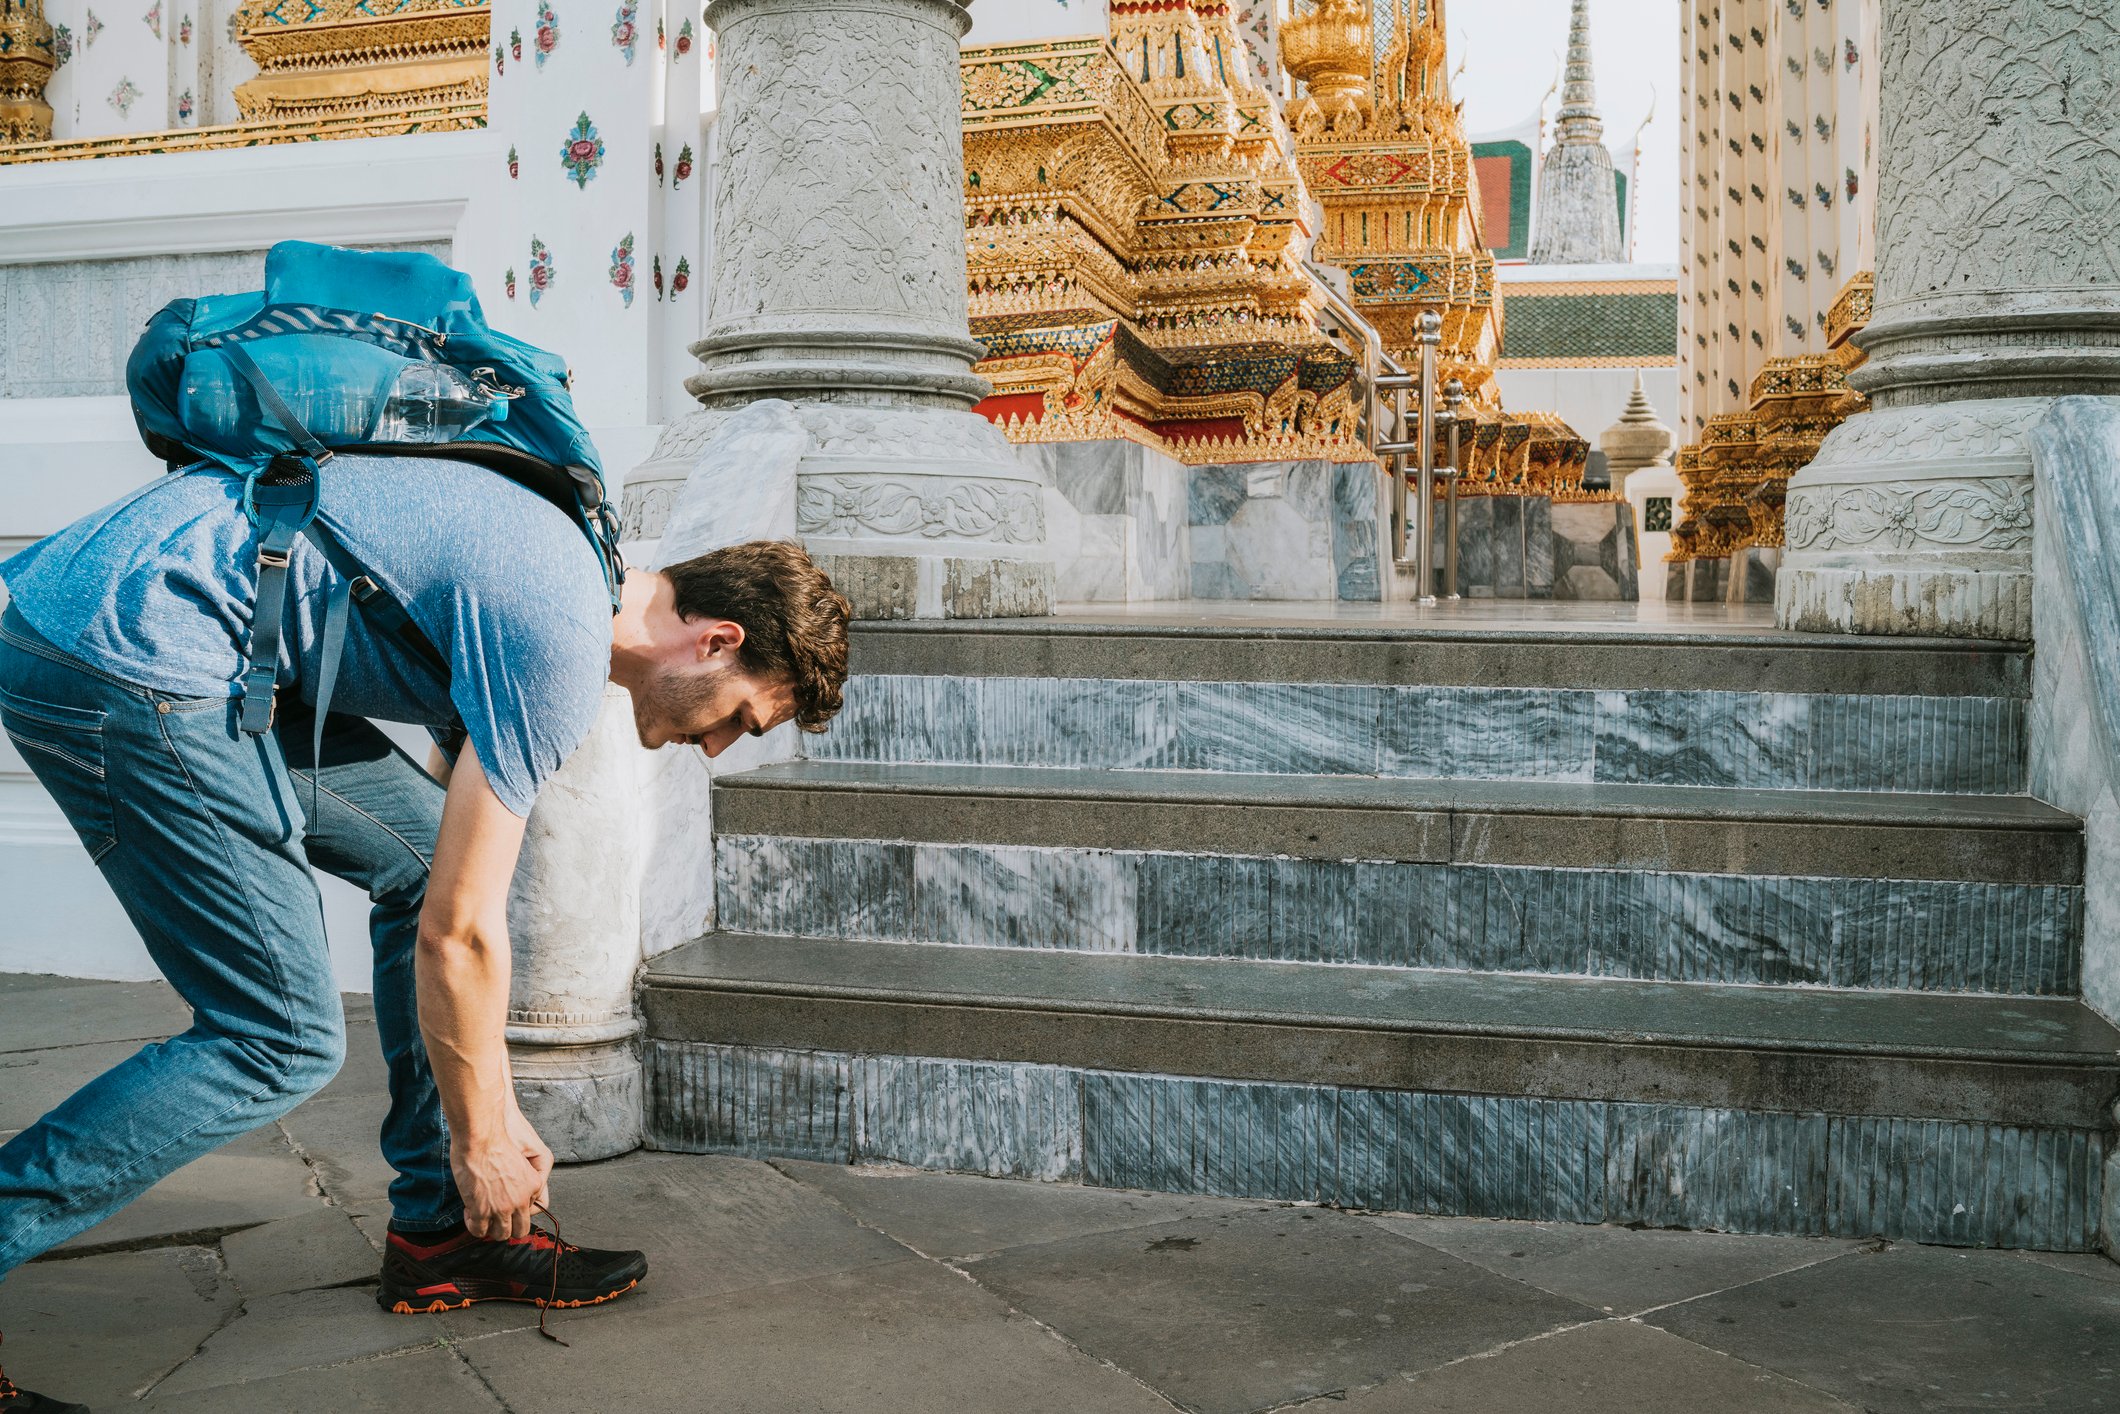 Removing shoes before entering Thailand temple